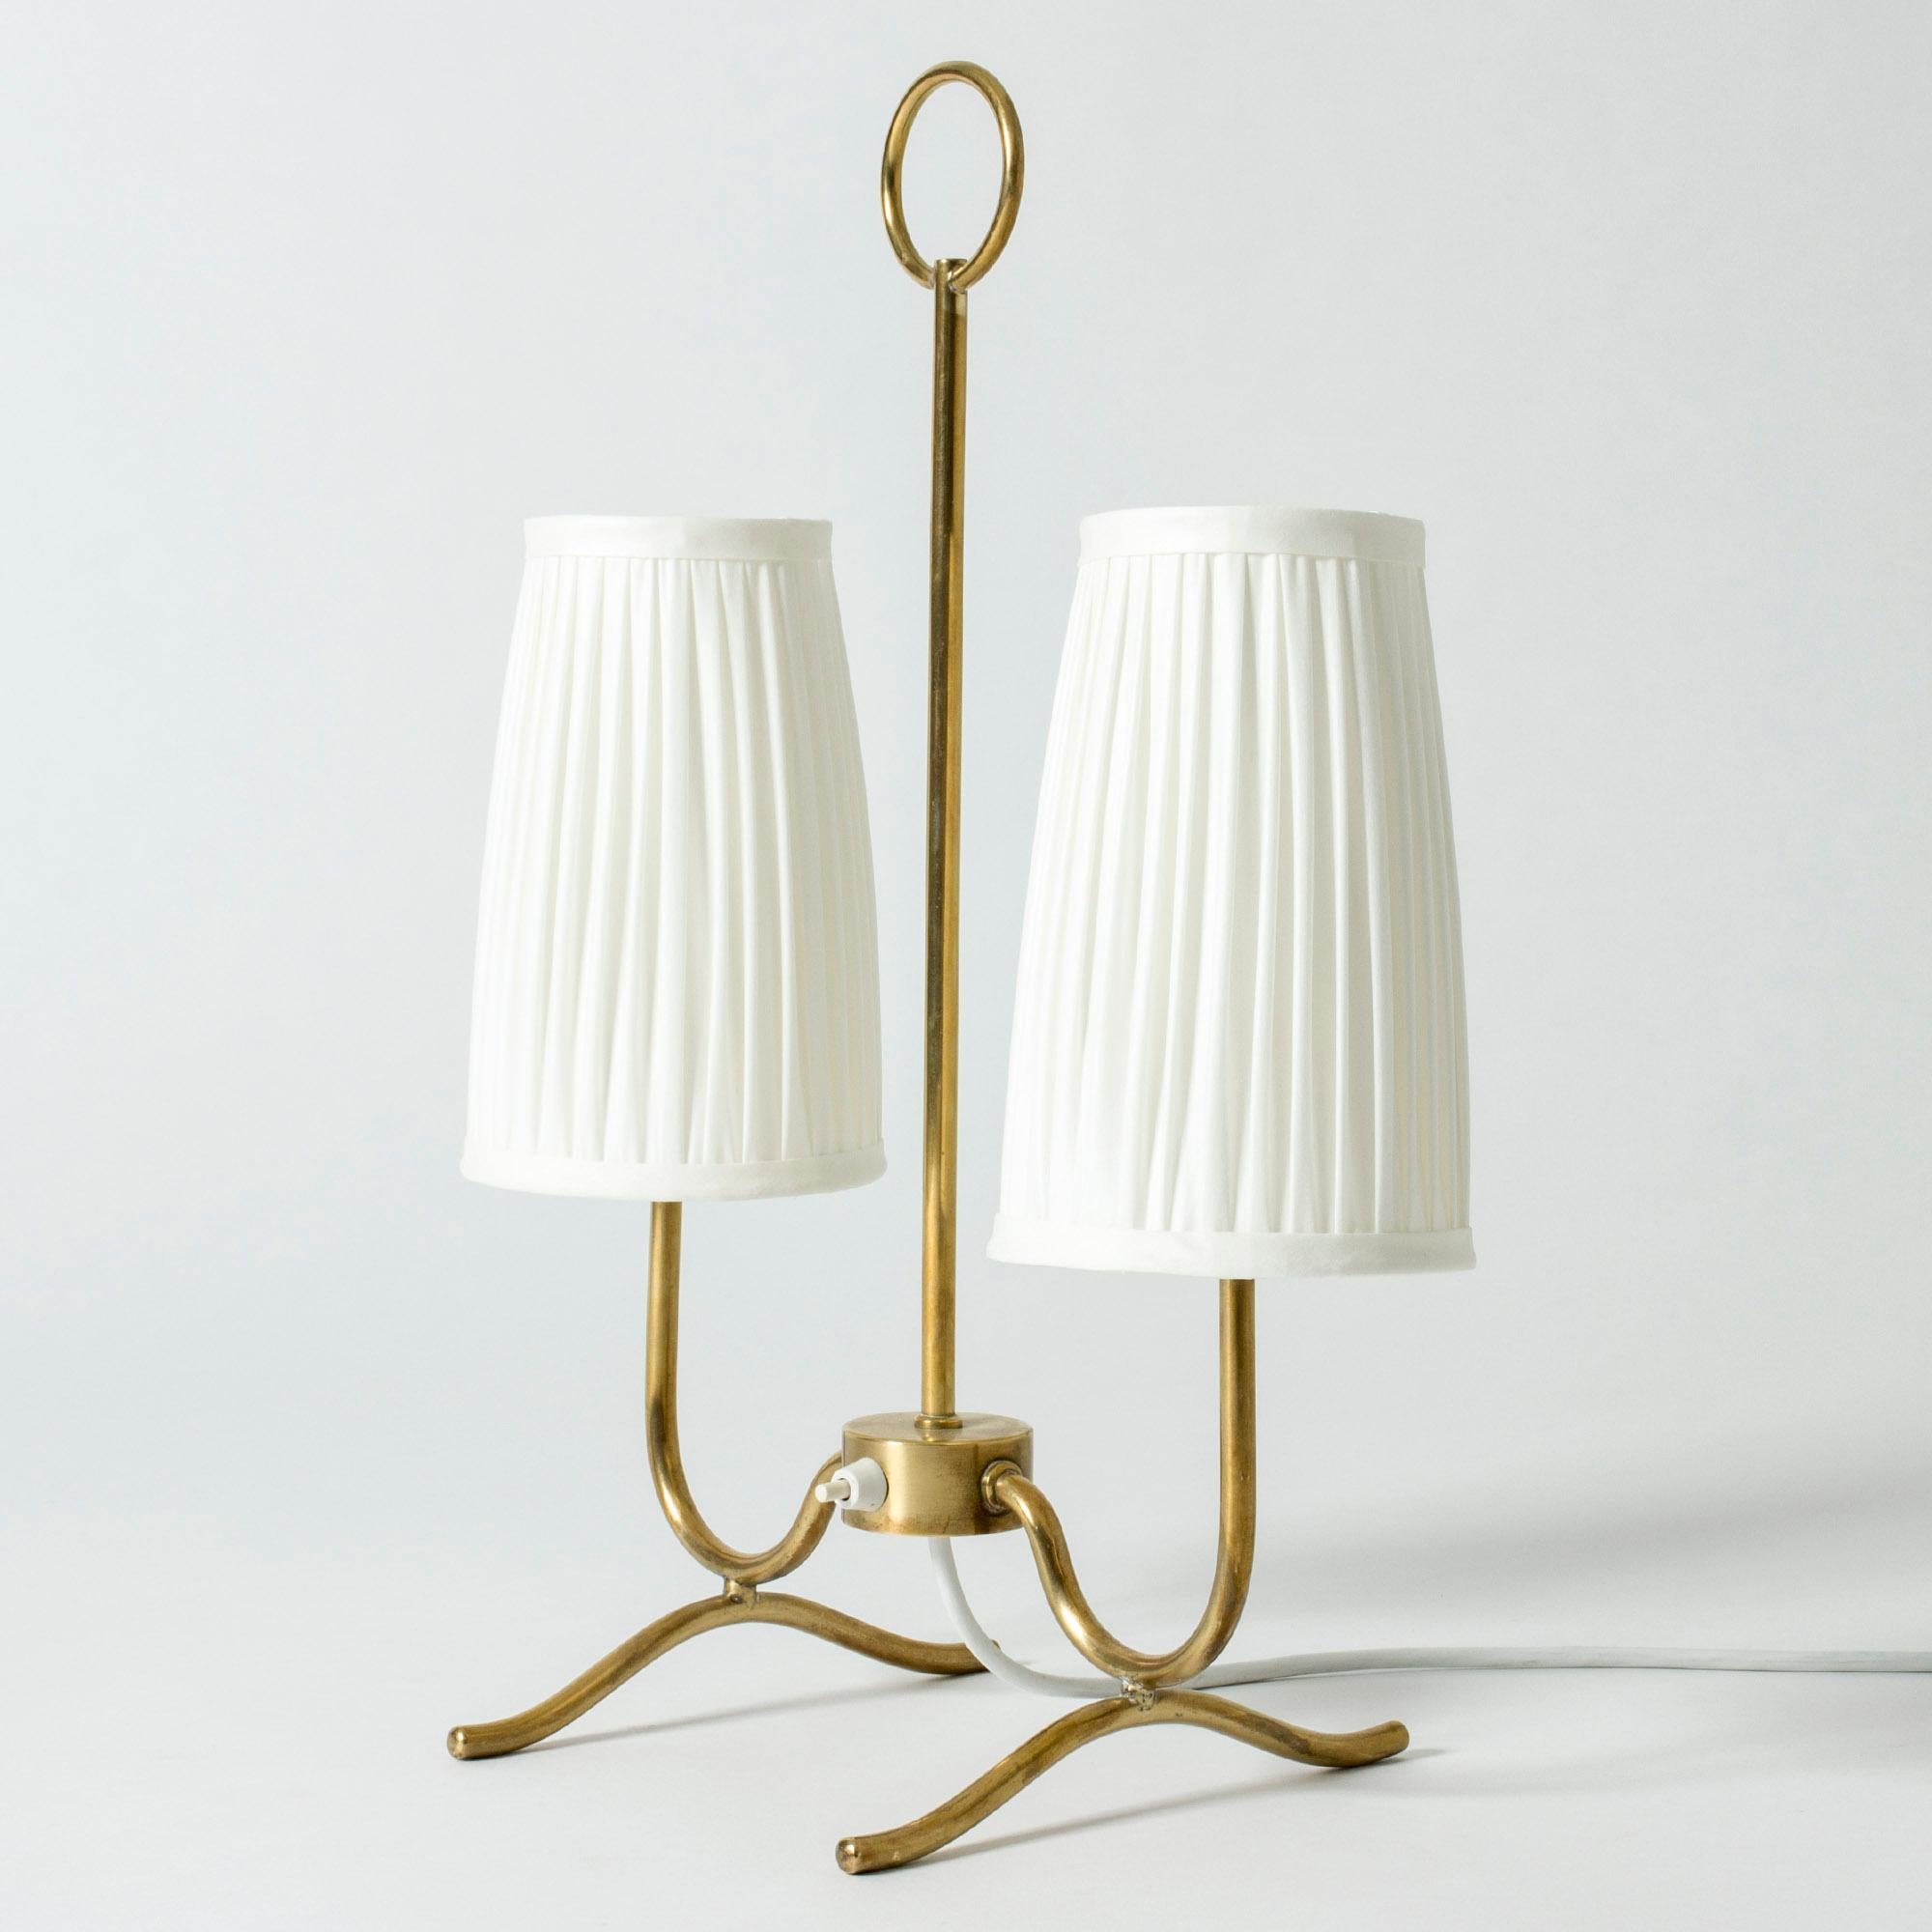 Lovely midcentury table lamp, made from brass. Slender, elegant design with two shades and a decorative hoop in the middle.